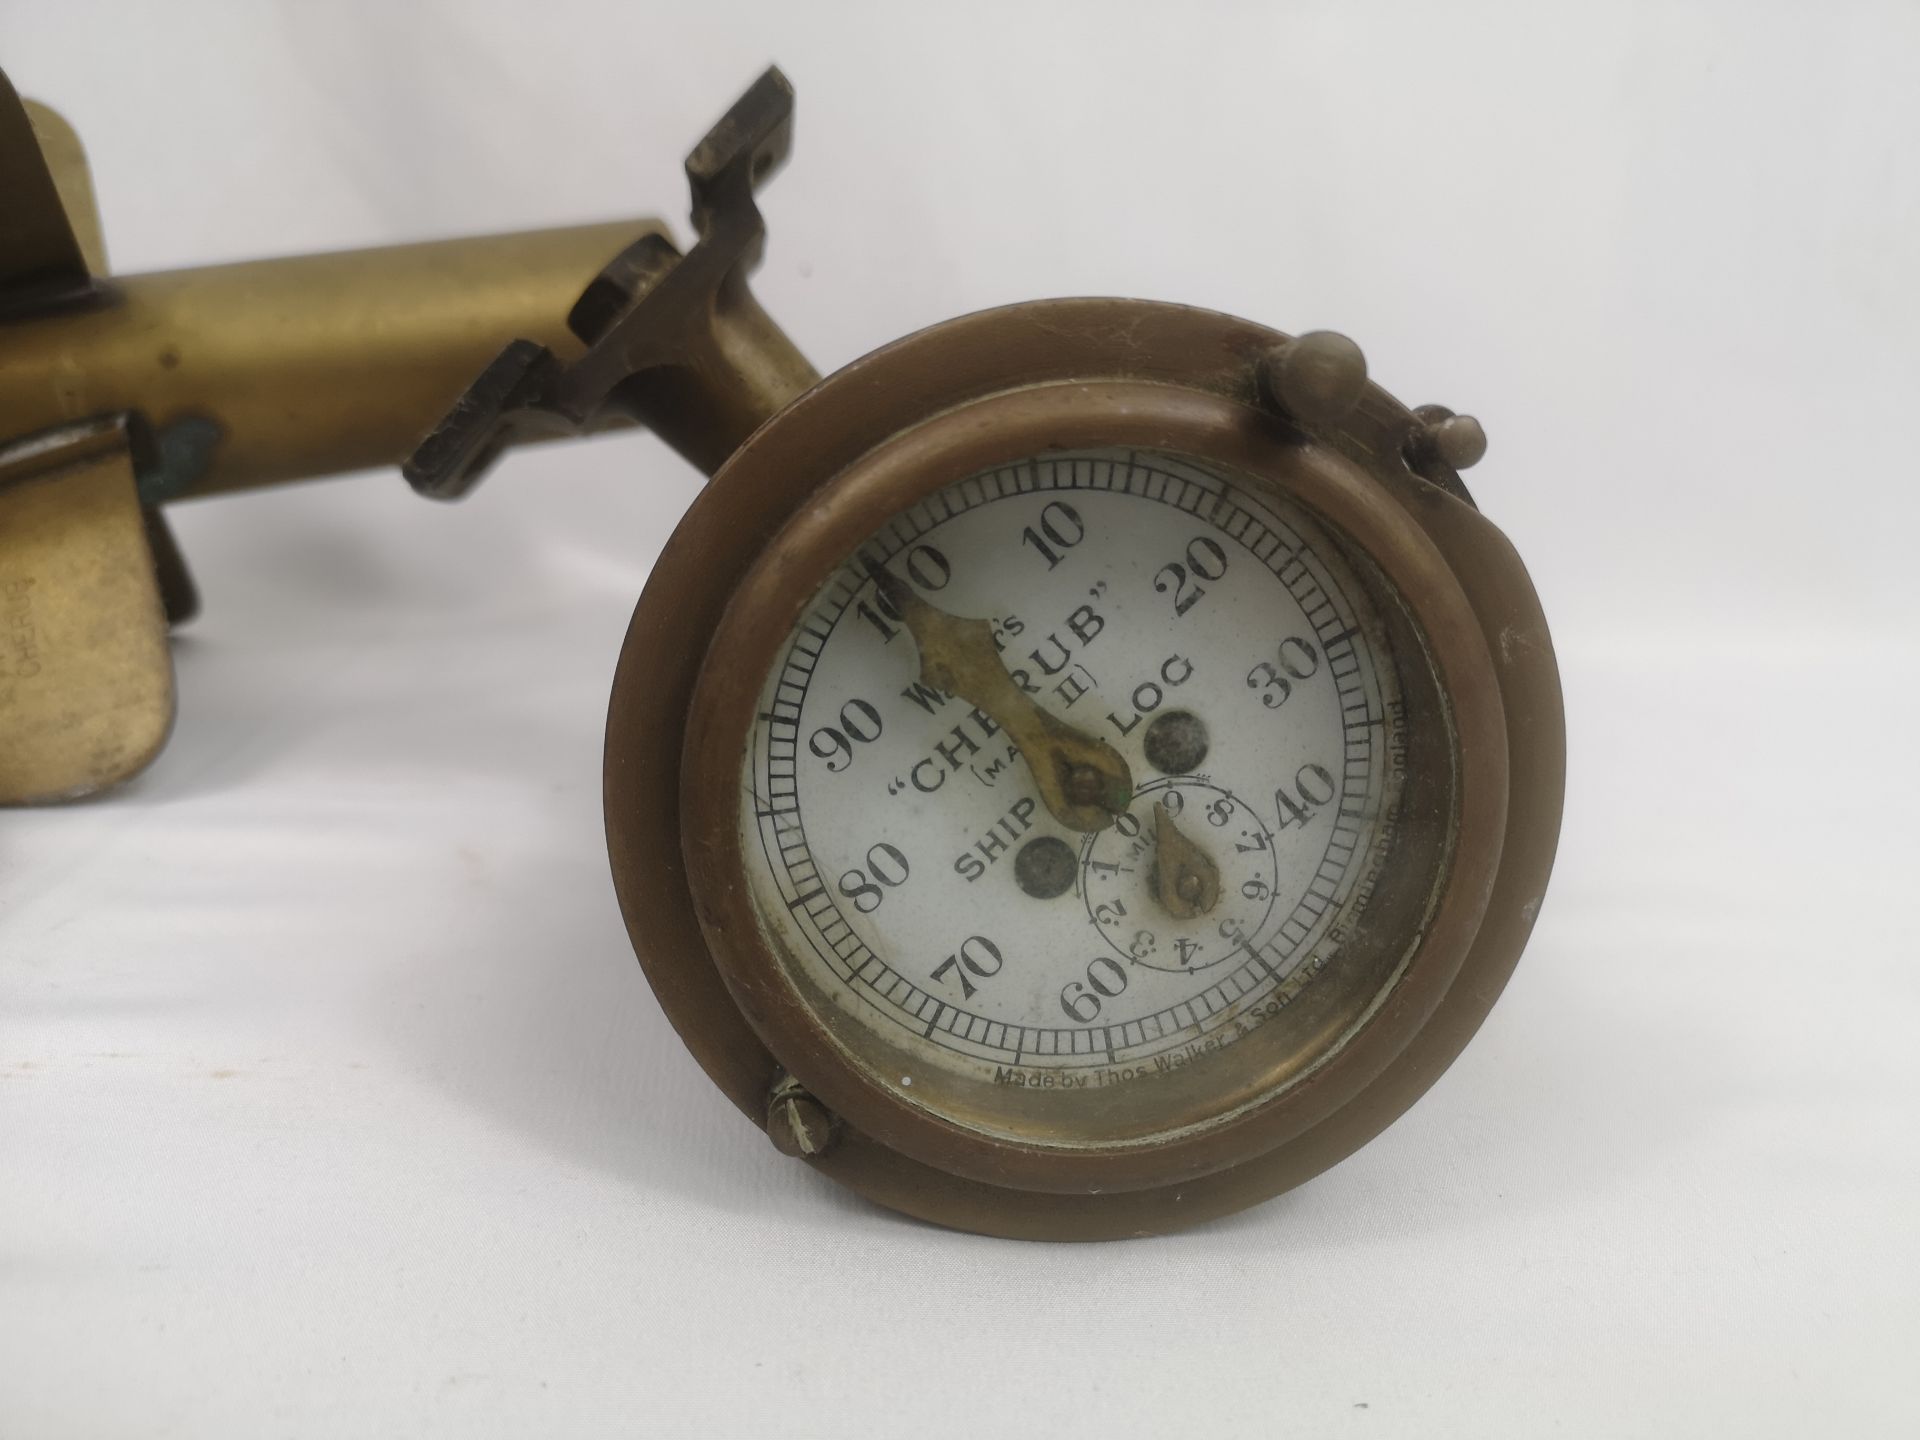 Cherub brass ships log dial and rotator; together with a propellor - Image 6 of 7